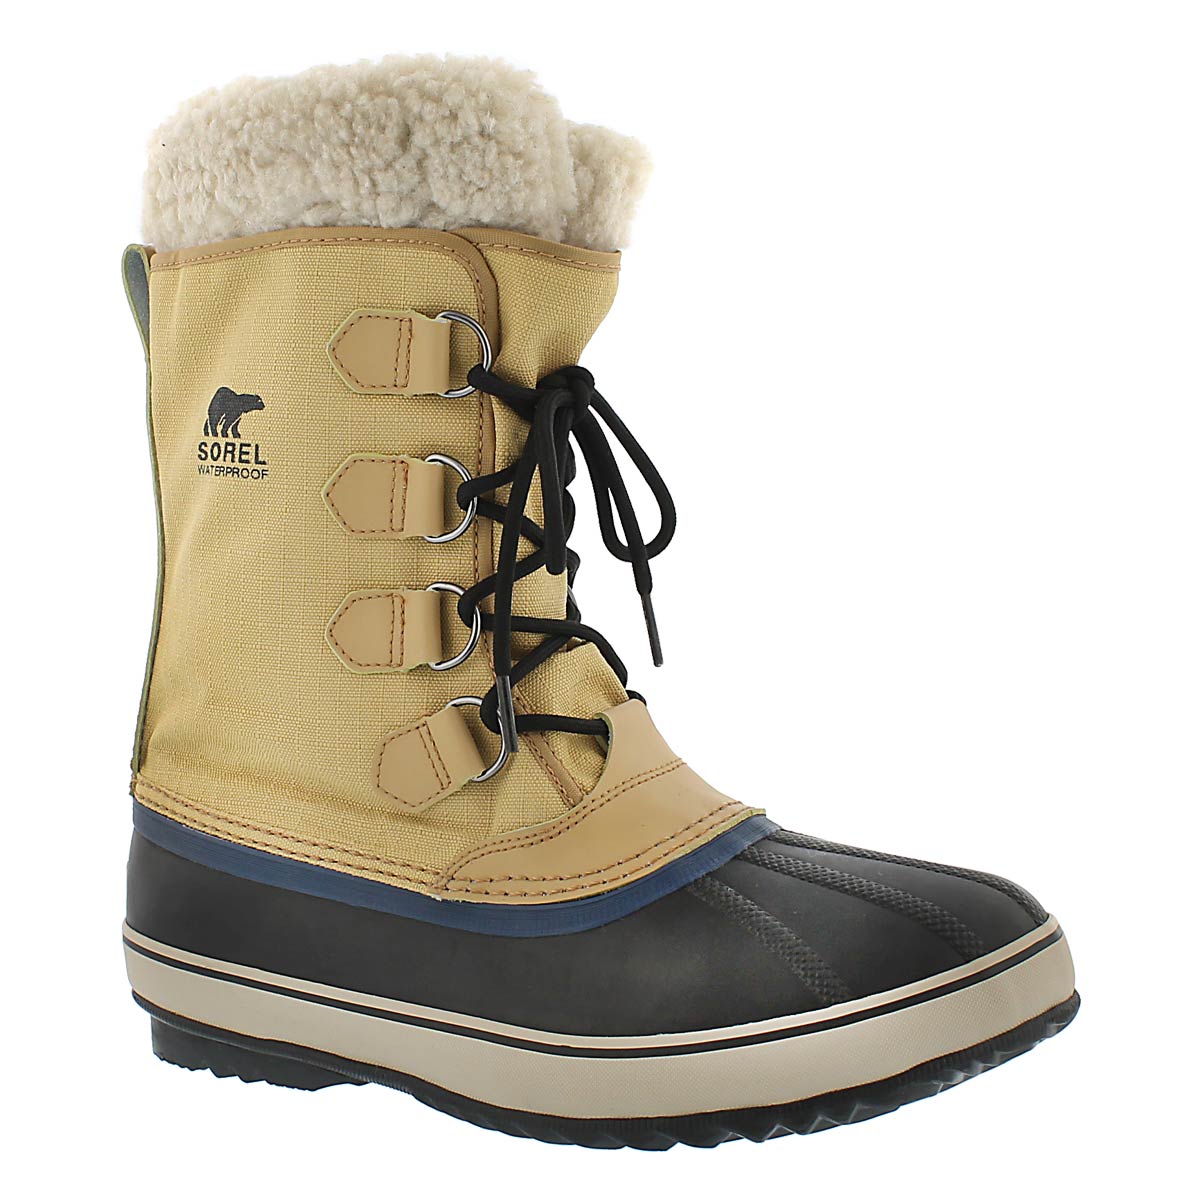 1964 PAC NYLON curry winter boots 